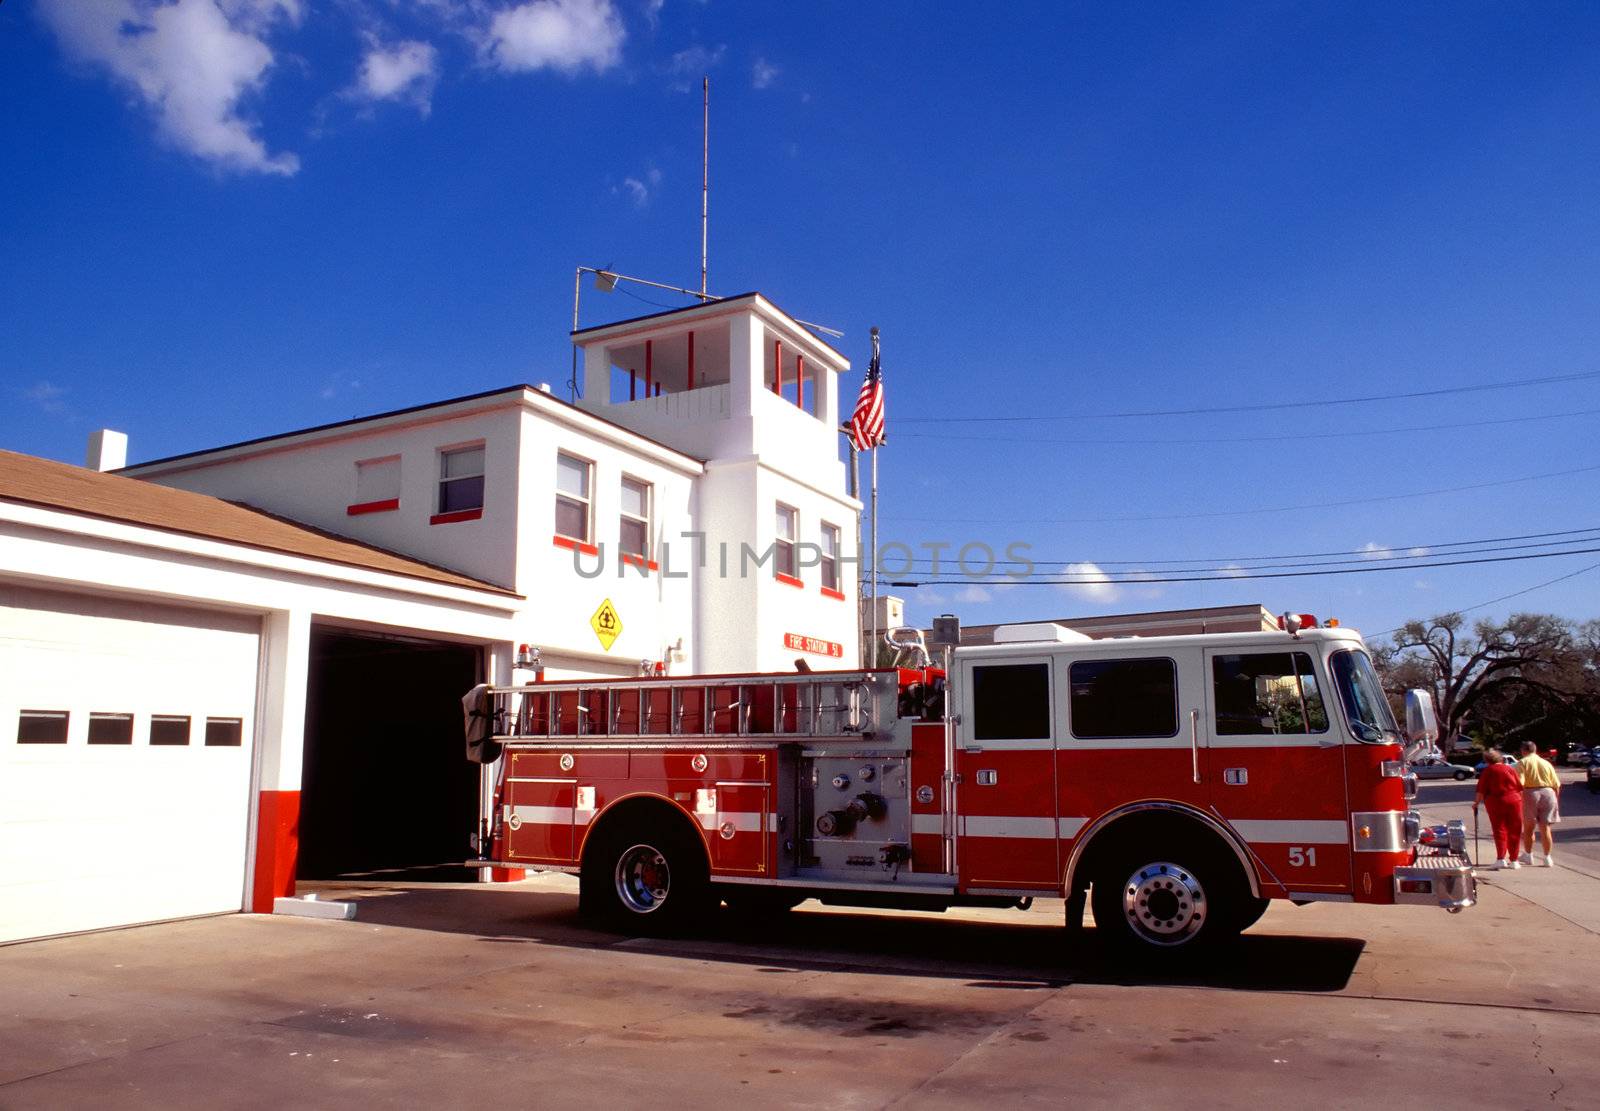 Red Fire Engine and Station by Geoarts